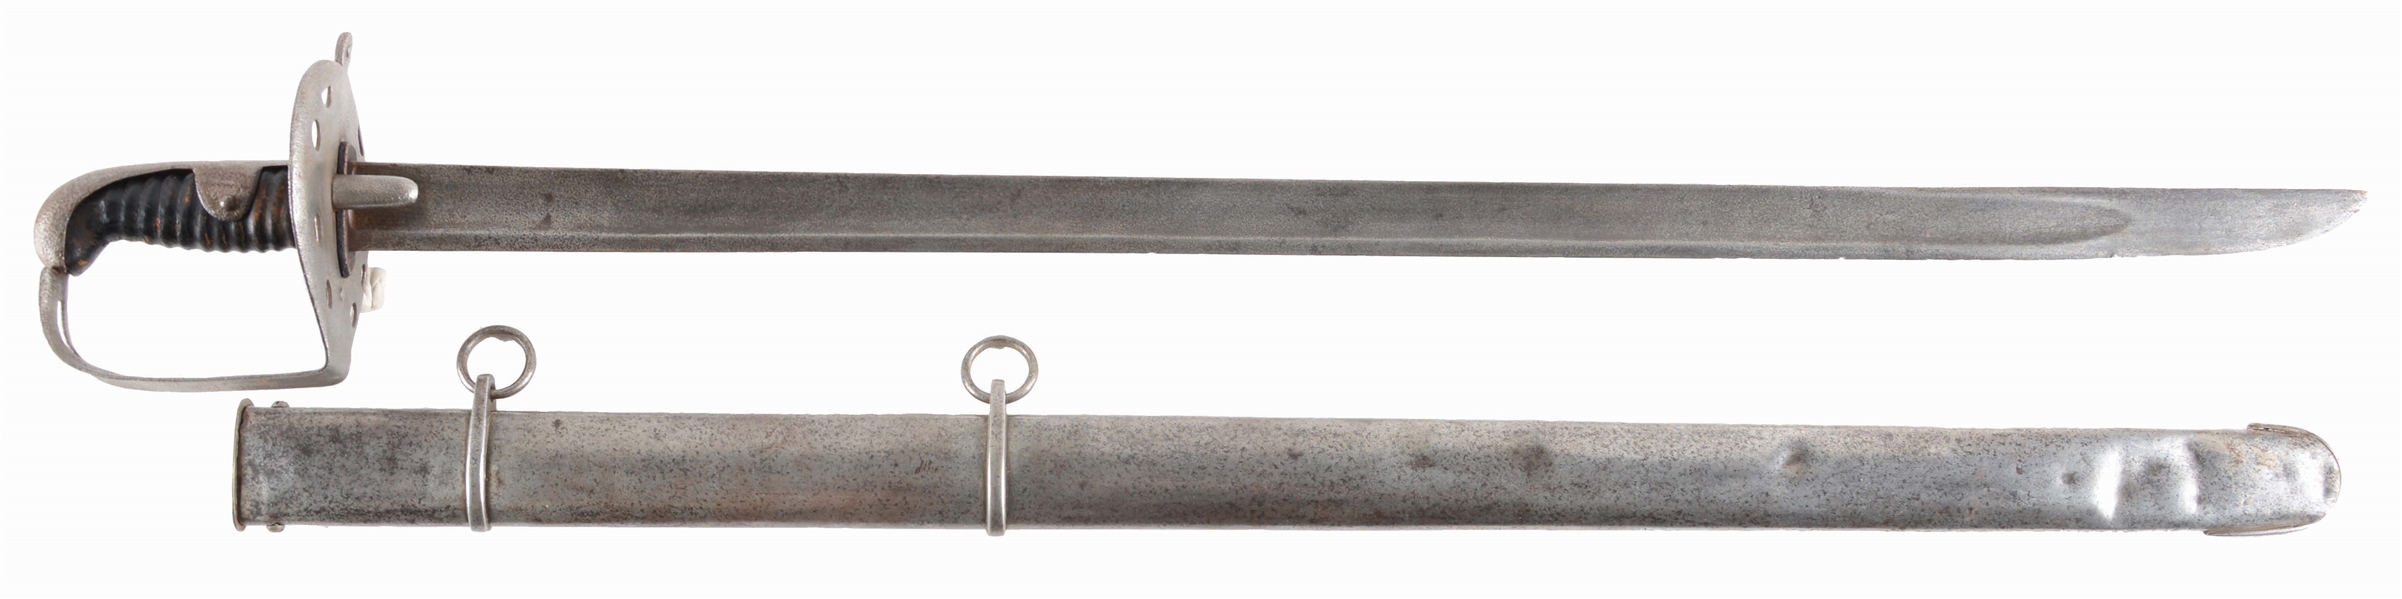 A SCARCE AND DESIRABLE PATTERN 1796 BRITISH HEAVY CAVALRY SWORD, FROM THE COLLECTION OF THE RENOWNED AUTHOR RICHARD H. BEZDEK. 